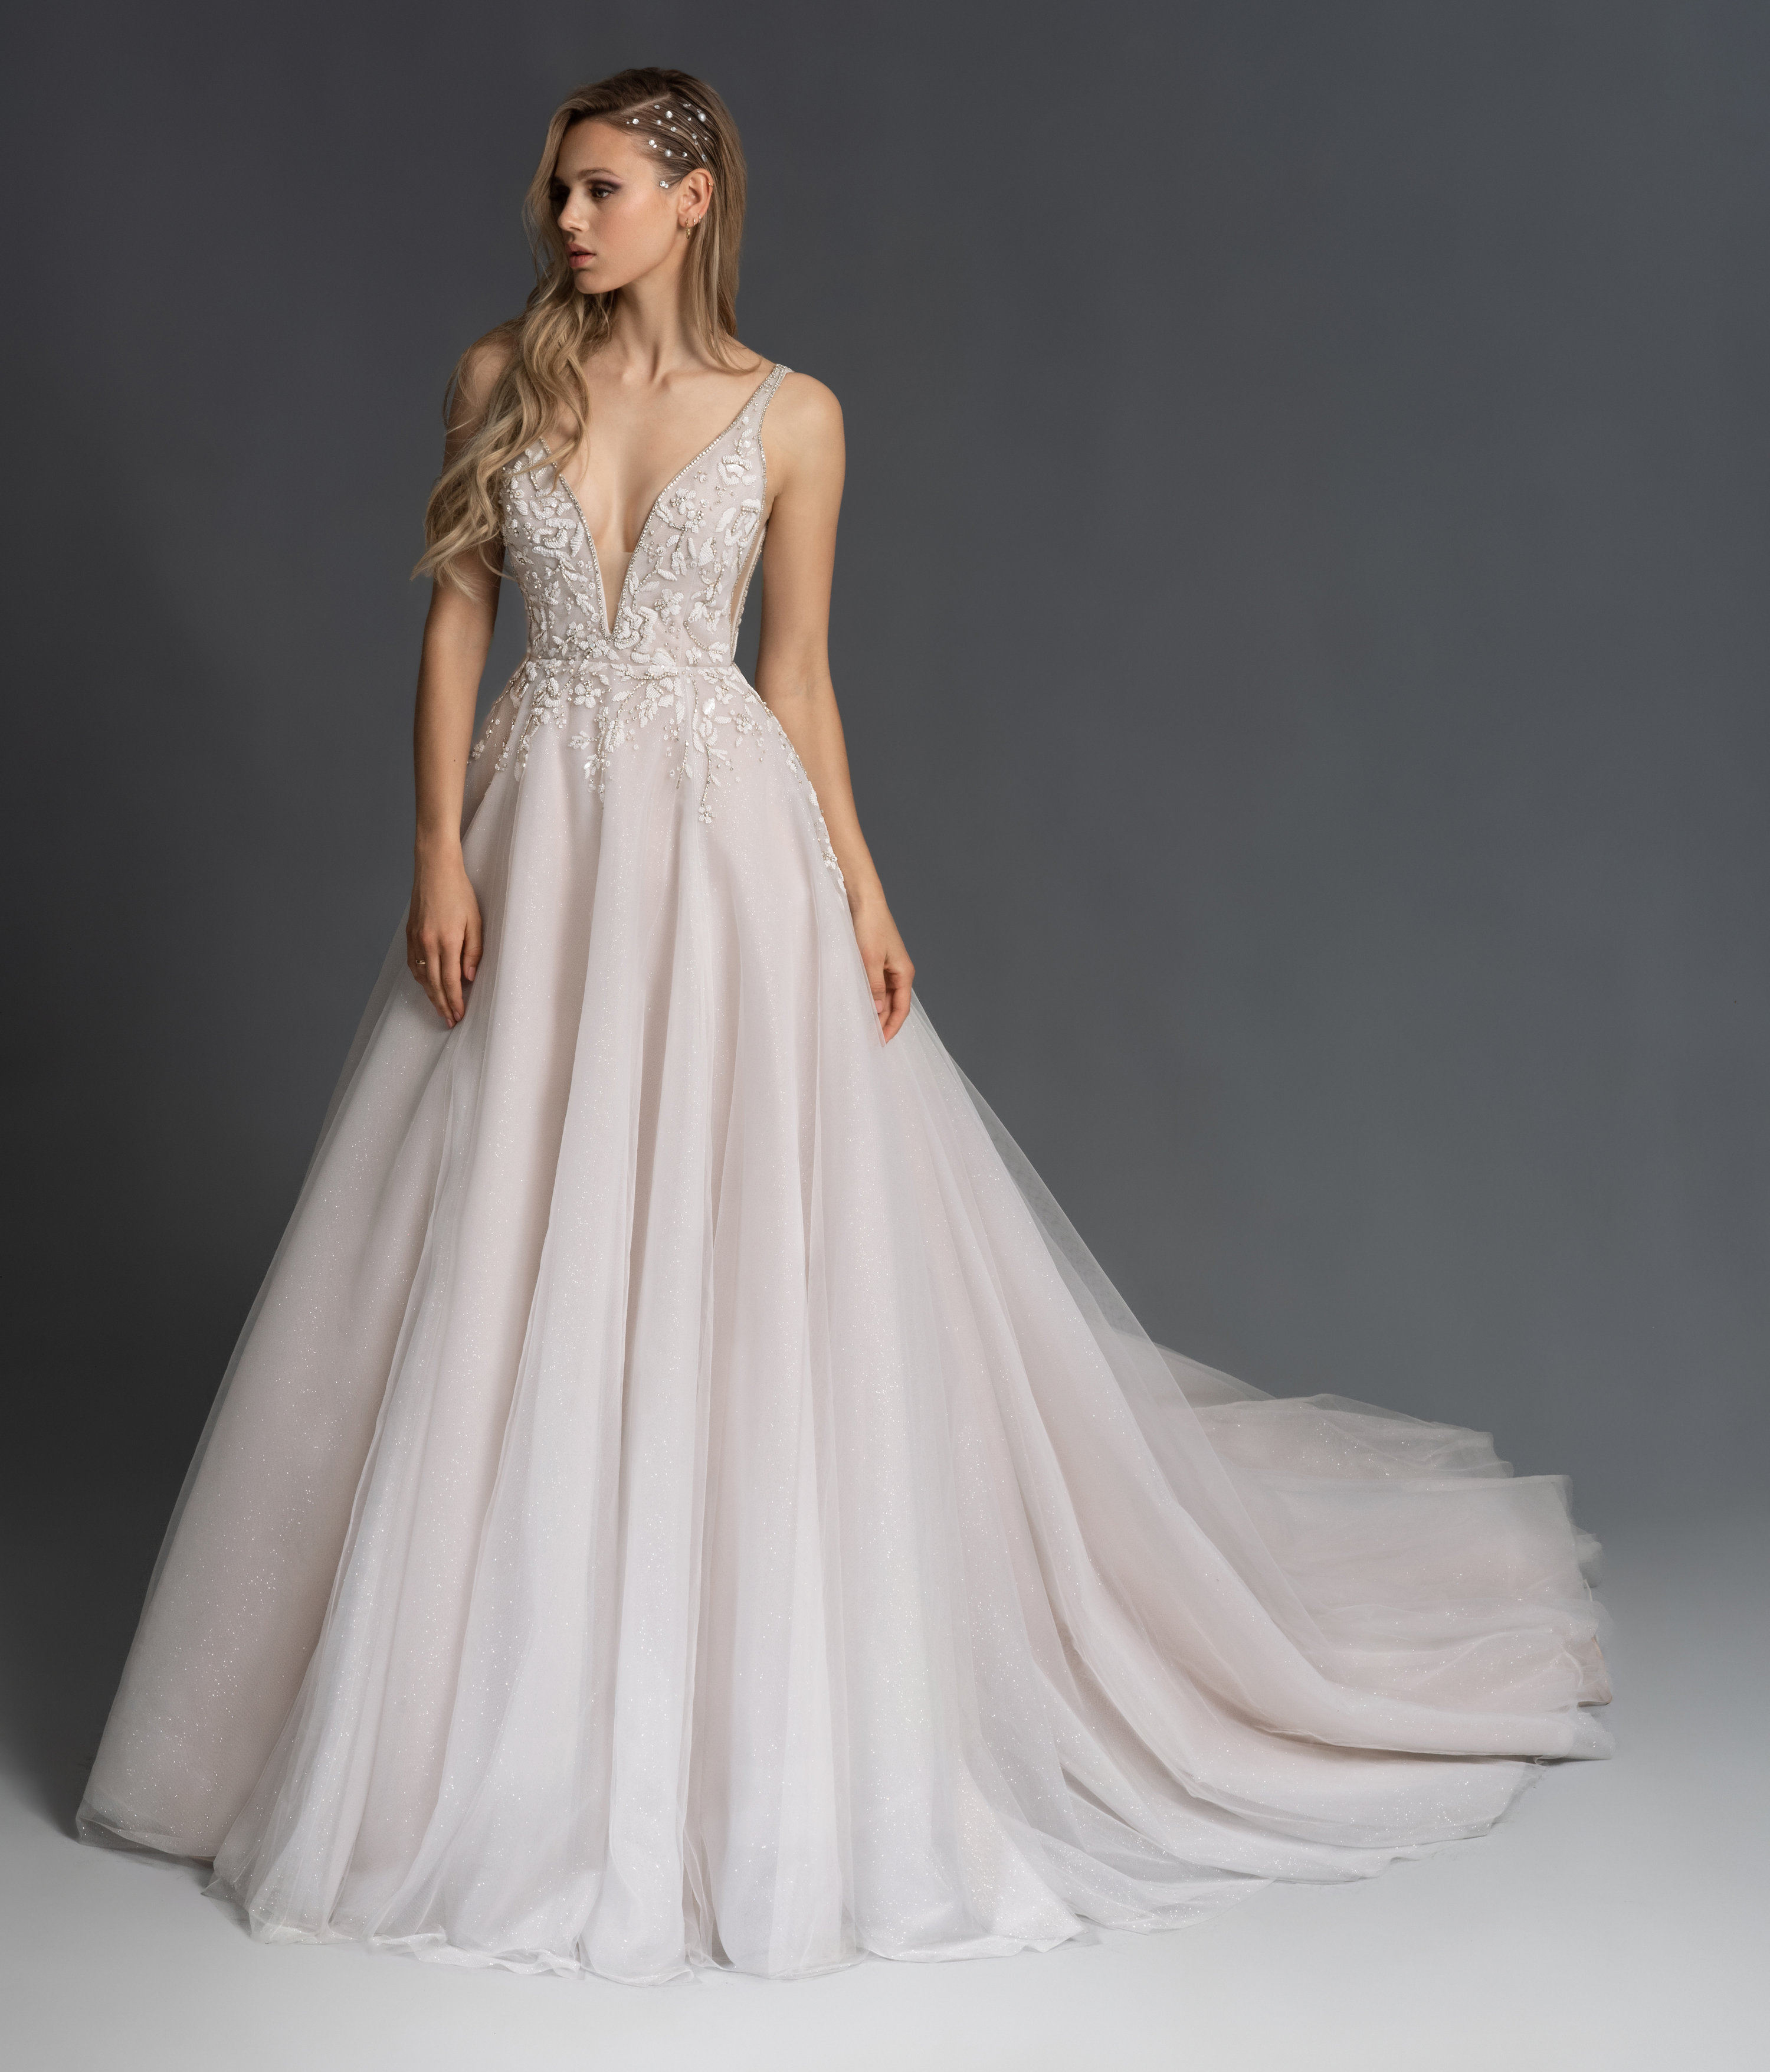 Bridal Gowns and Wedding Dresses by JLM Couture   Style 8 Lauren